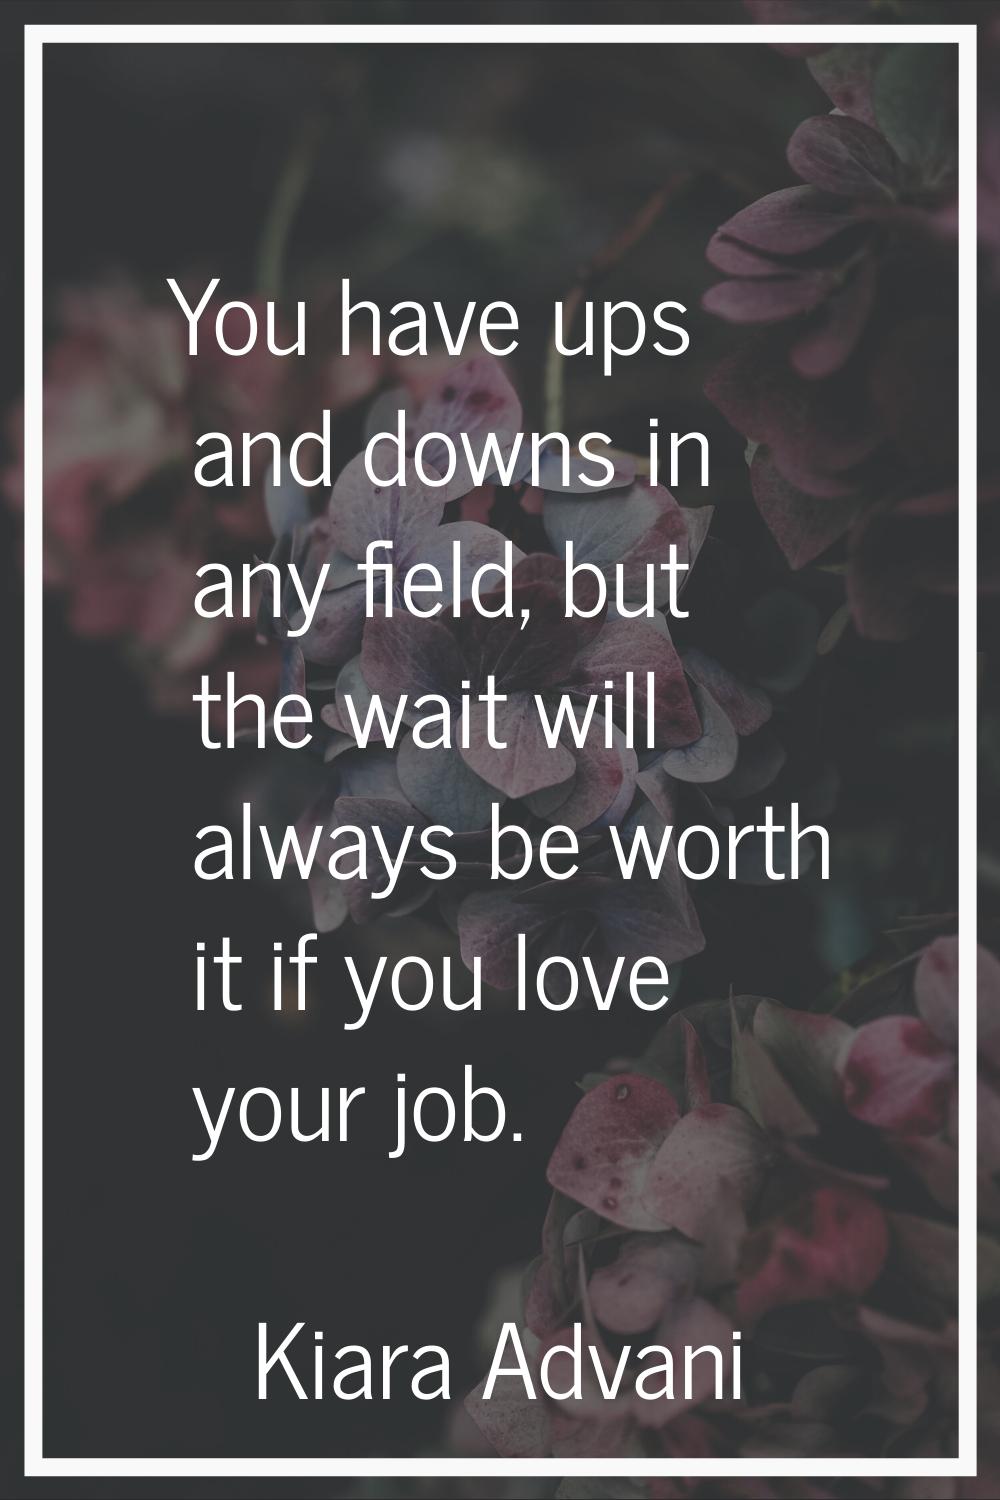 You have ups and downs in any field, but the wait will always be worth it if you love your job.